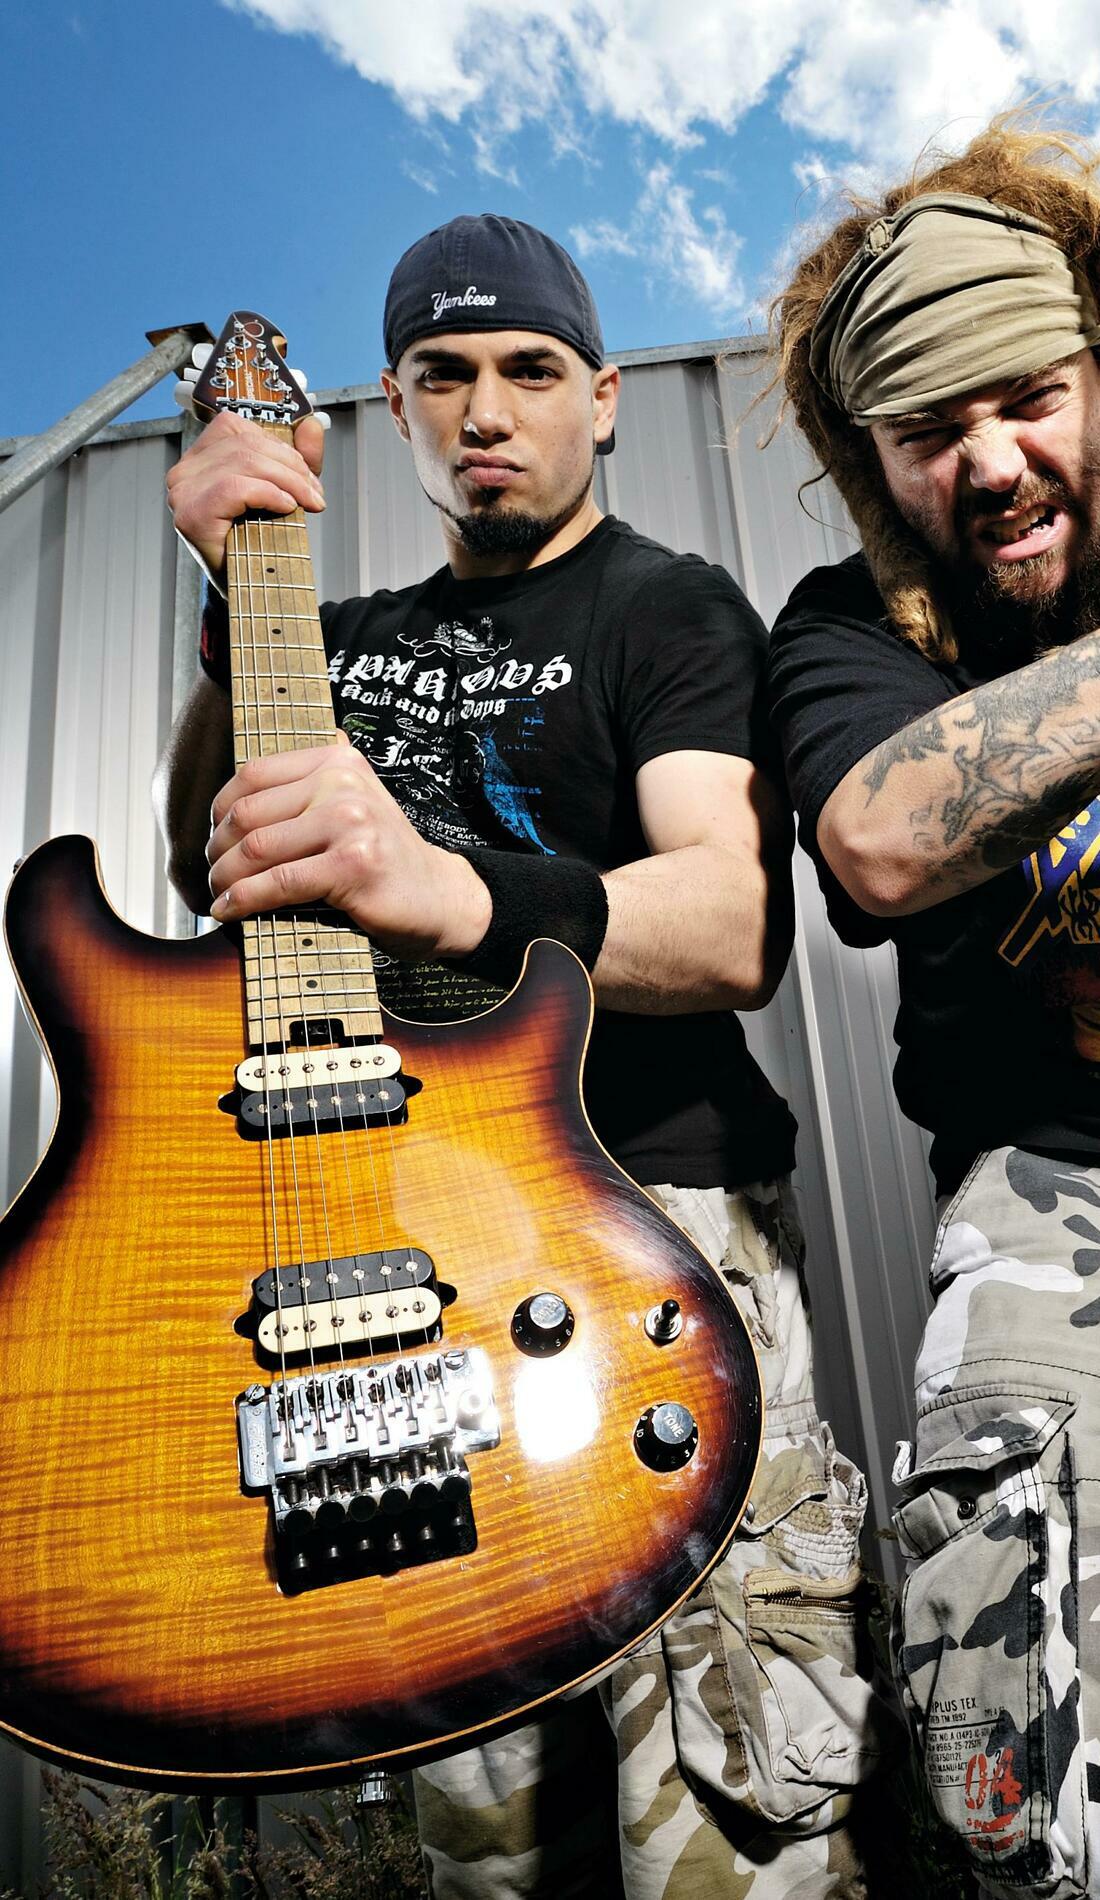 A Soulfly live event